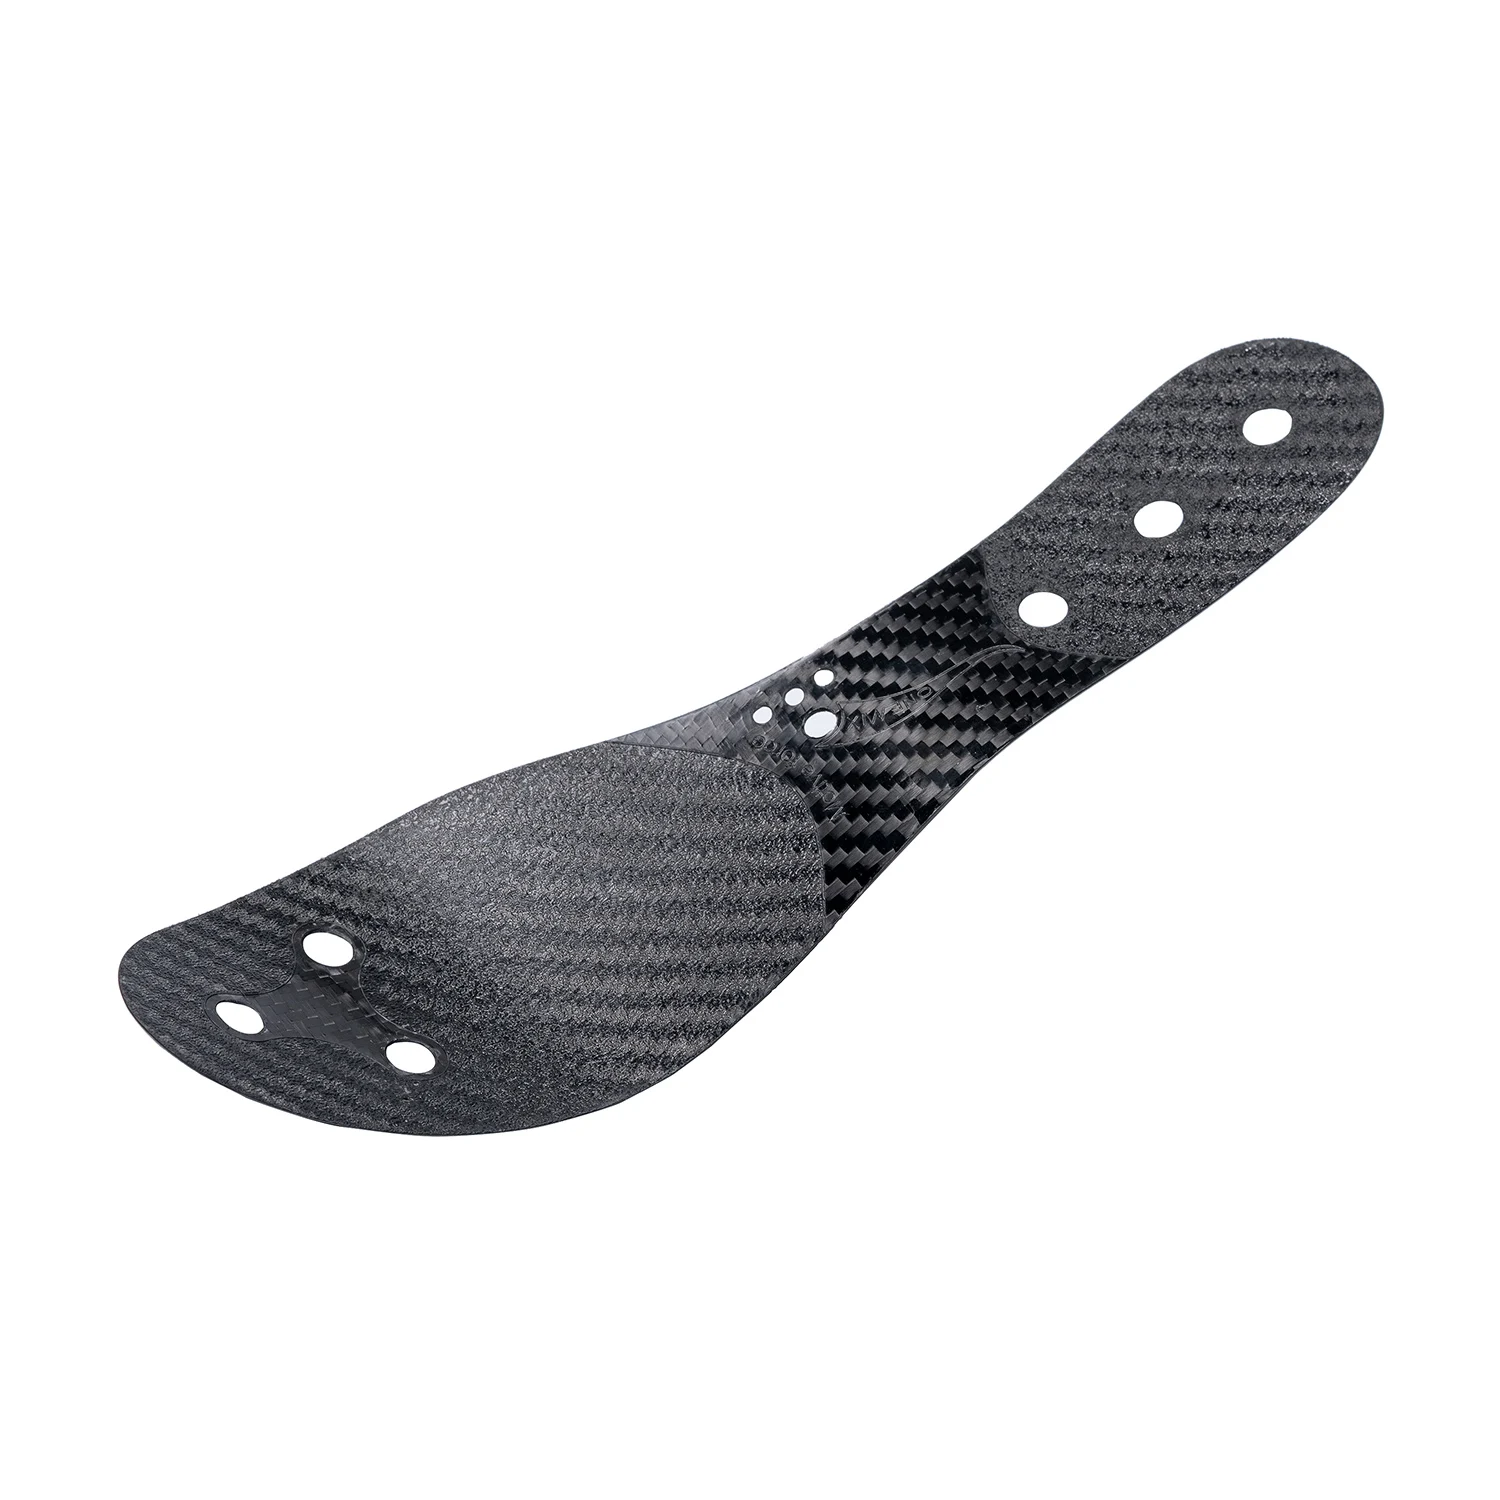 Carbon Fiber Insole Insole Rigidity - Strong Boost Insole 45° for Competitive Running, Sports Tests, Marathon Training Runs